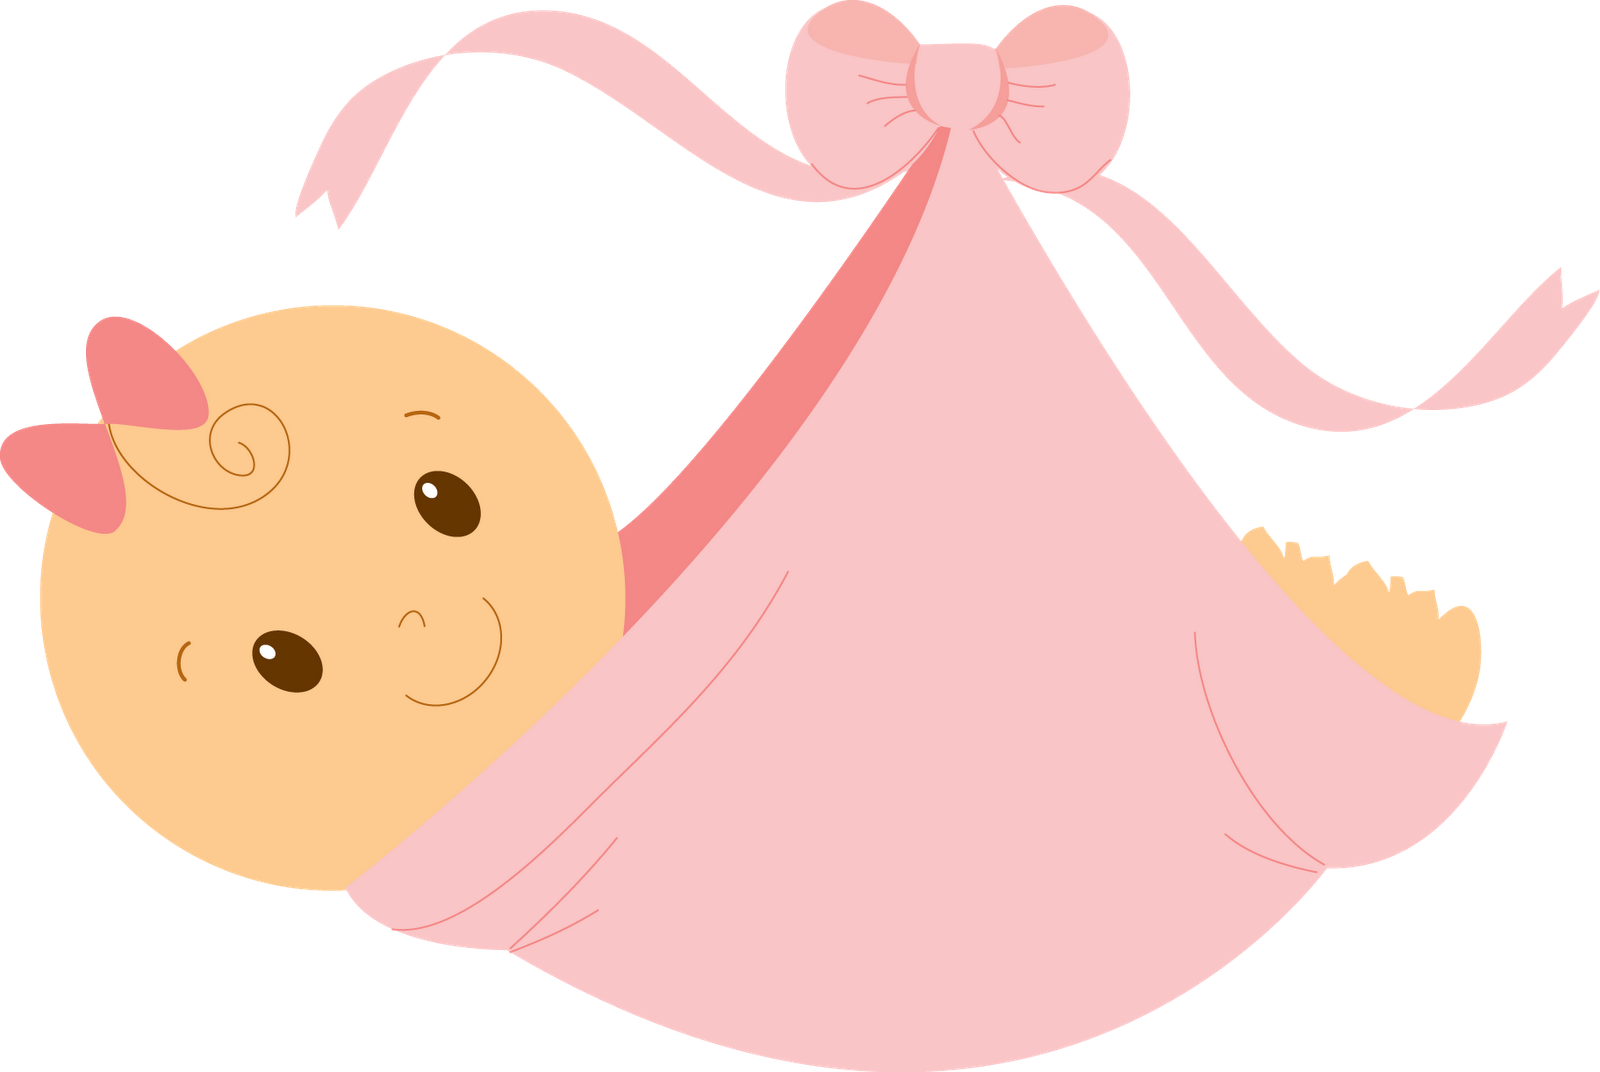 congrats-on-baby-girl.png (37